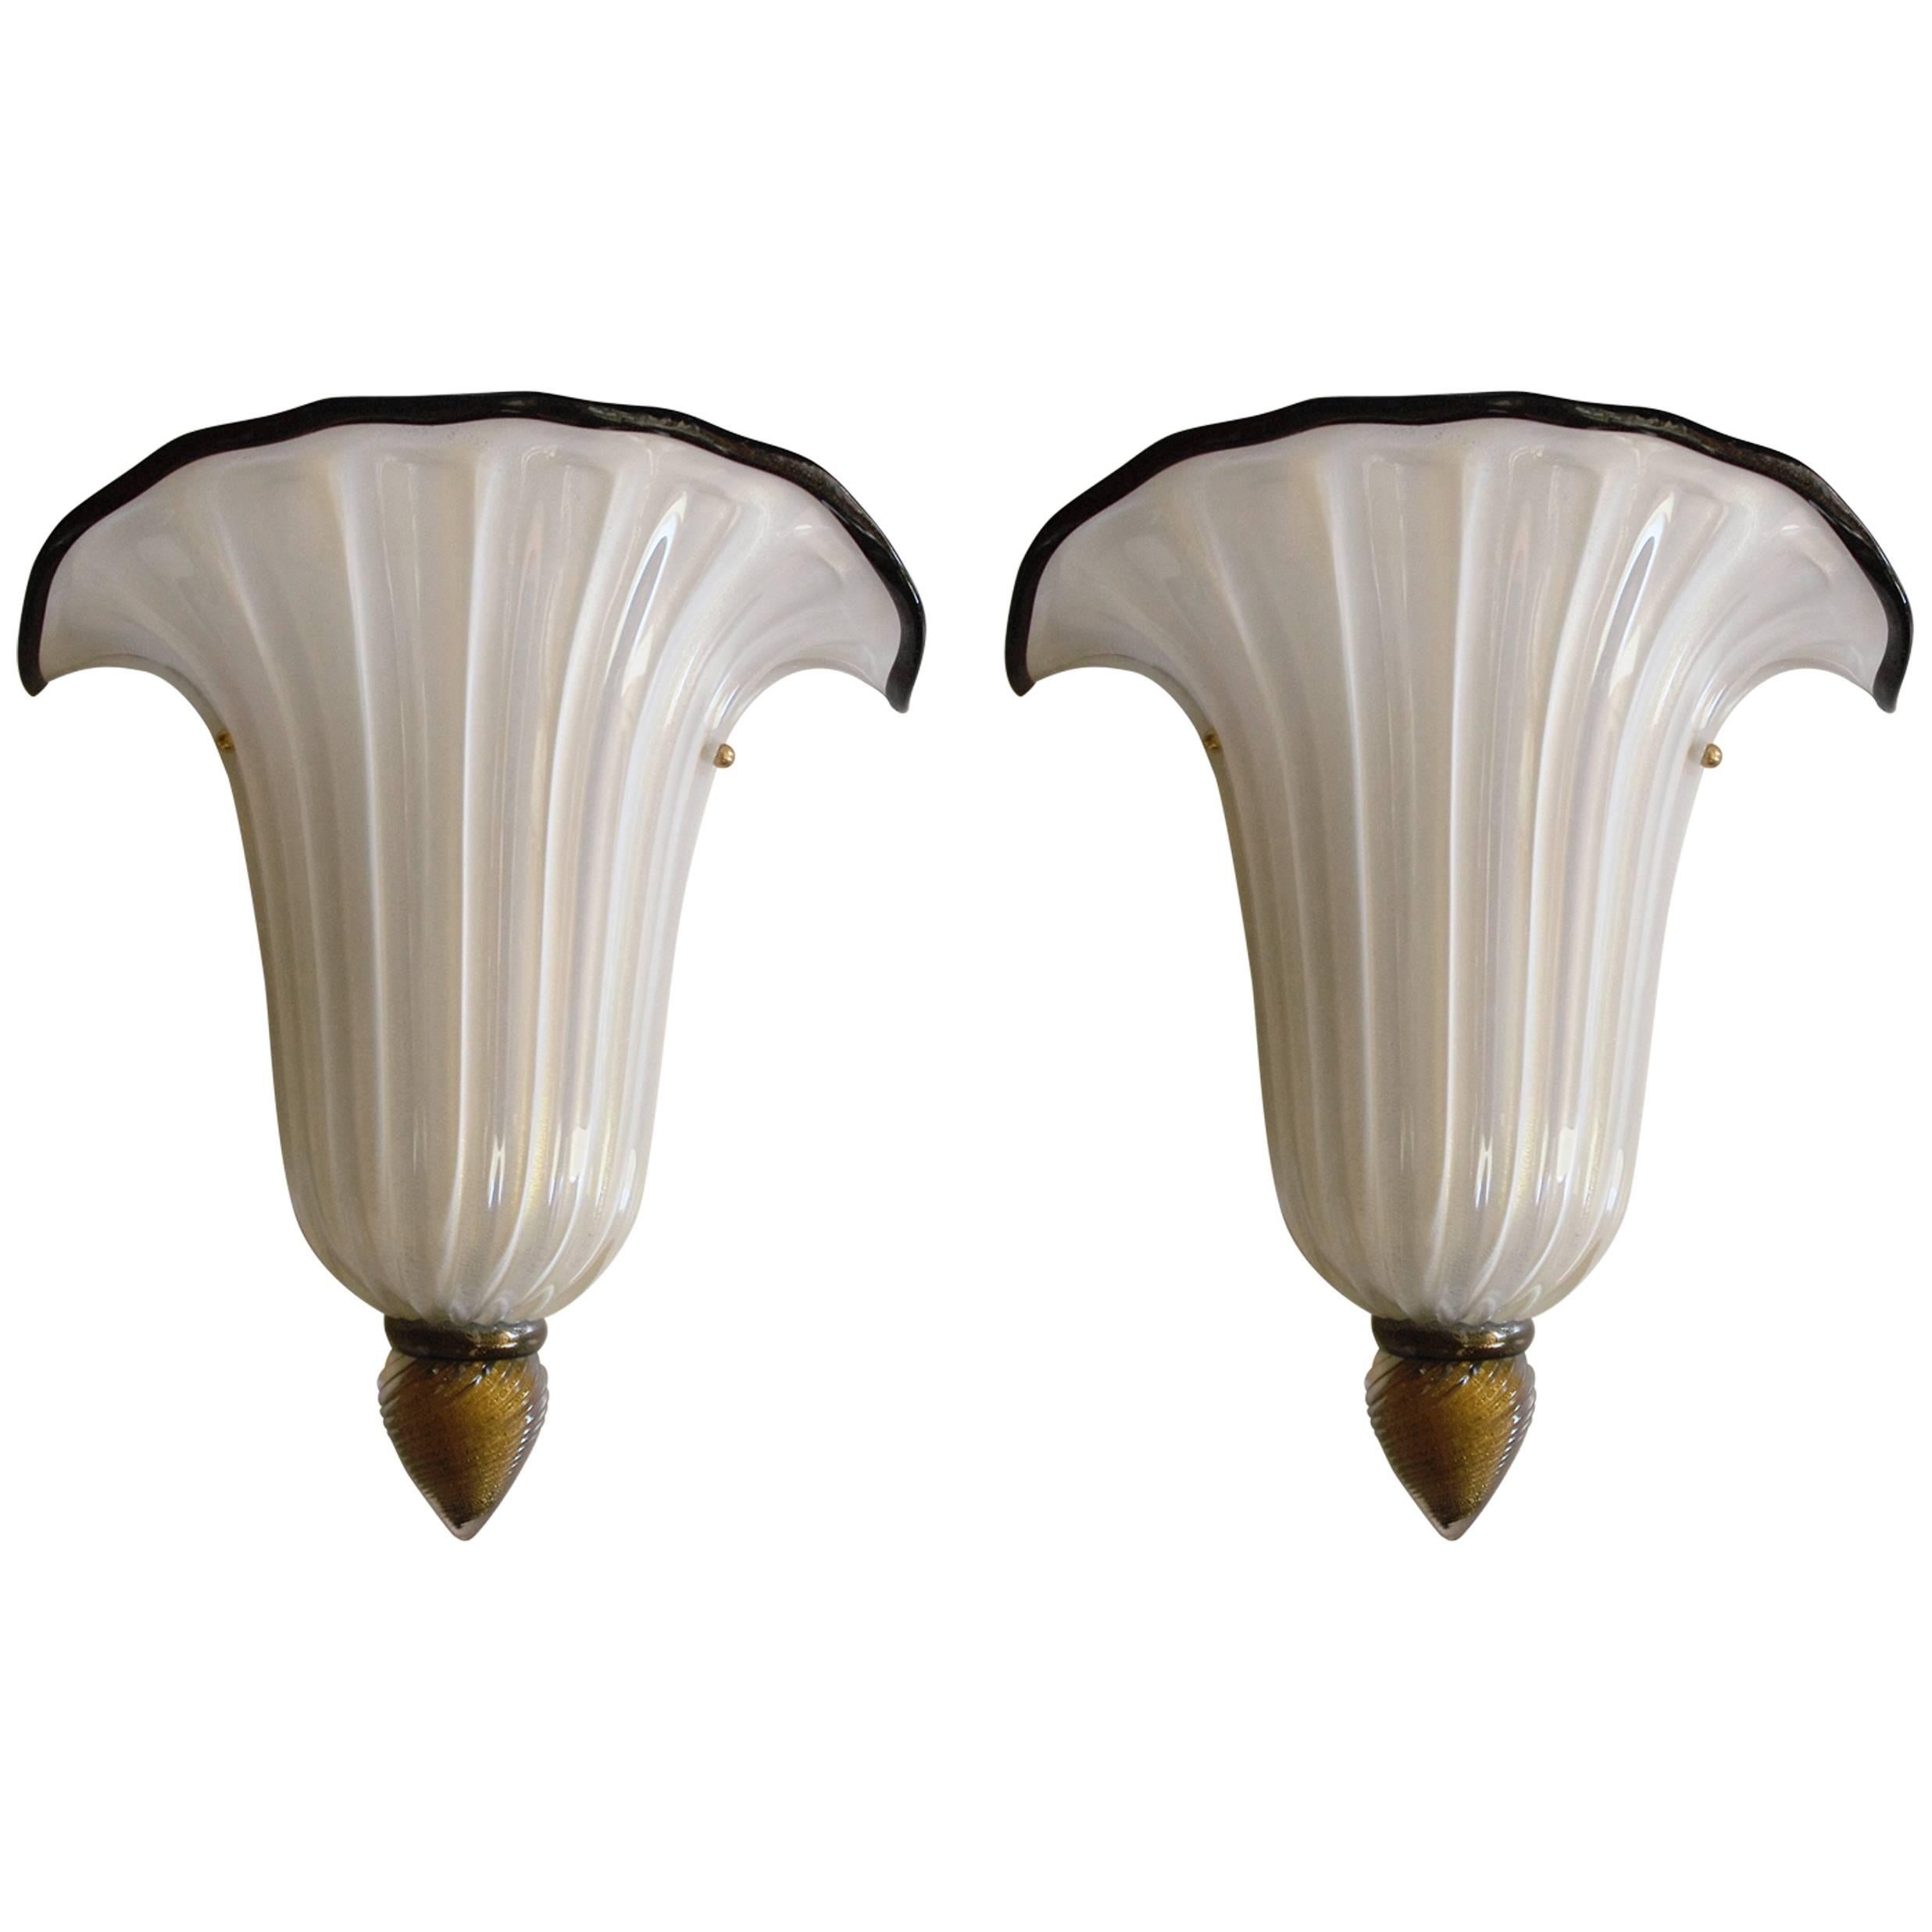 Pair of Shell Sconces by Barovier e Toso